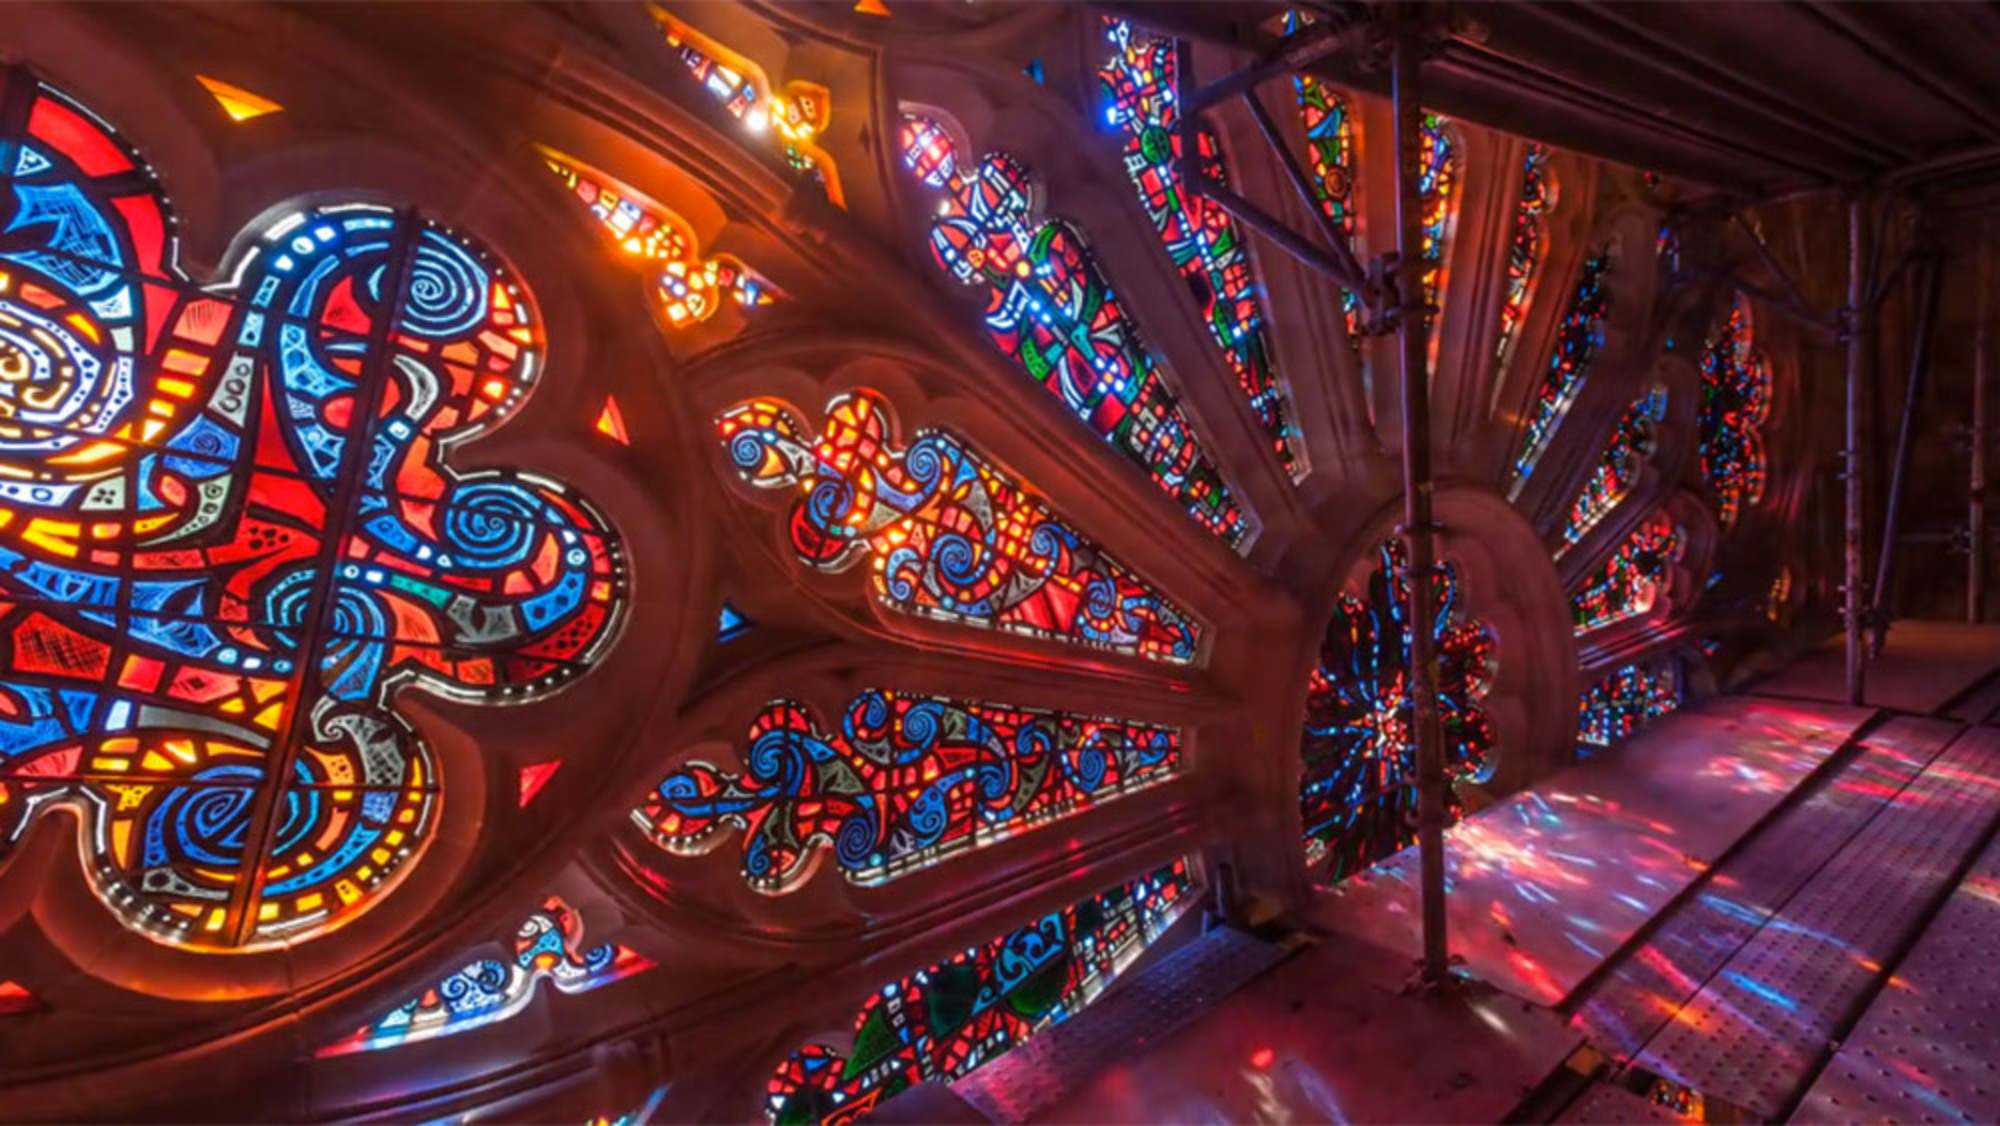 Time-lapse transforms stained-glass light into a stunning ...